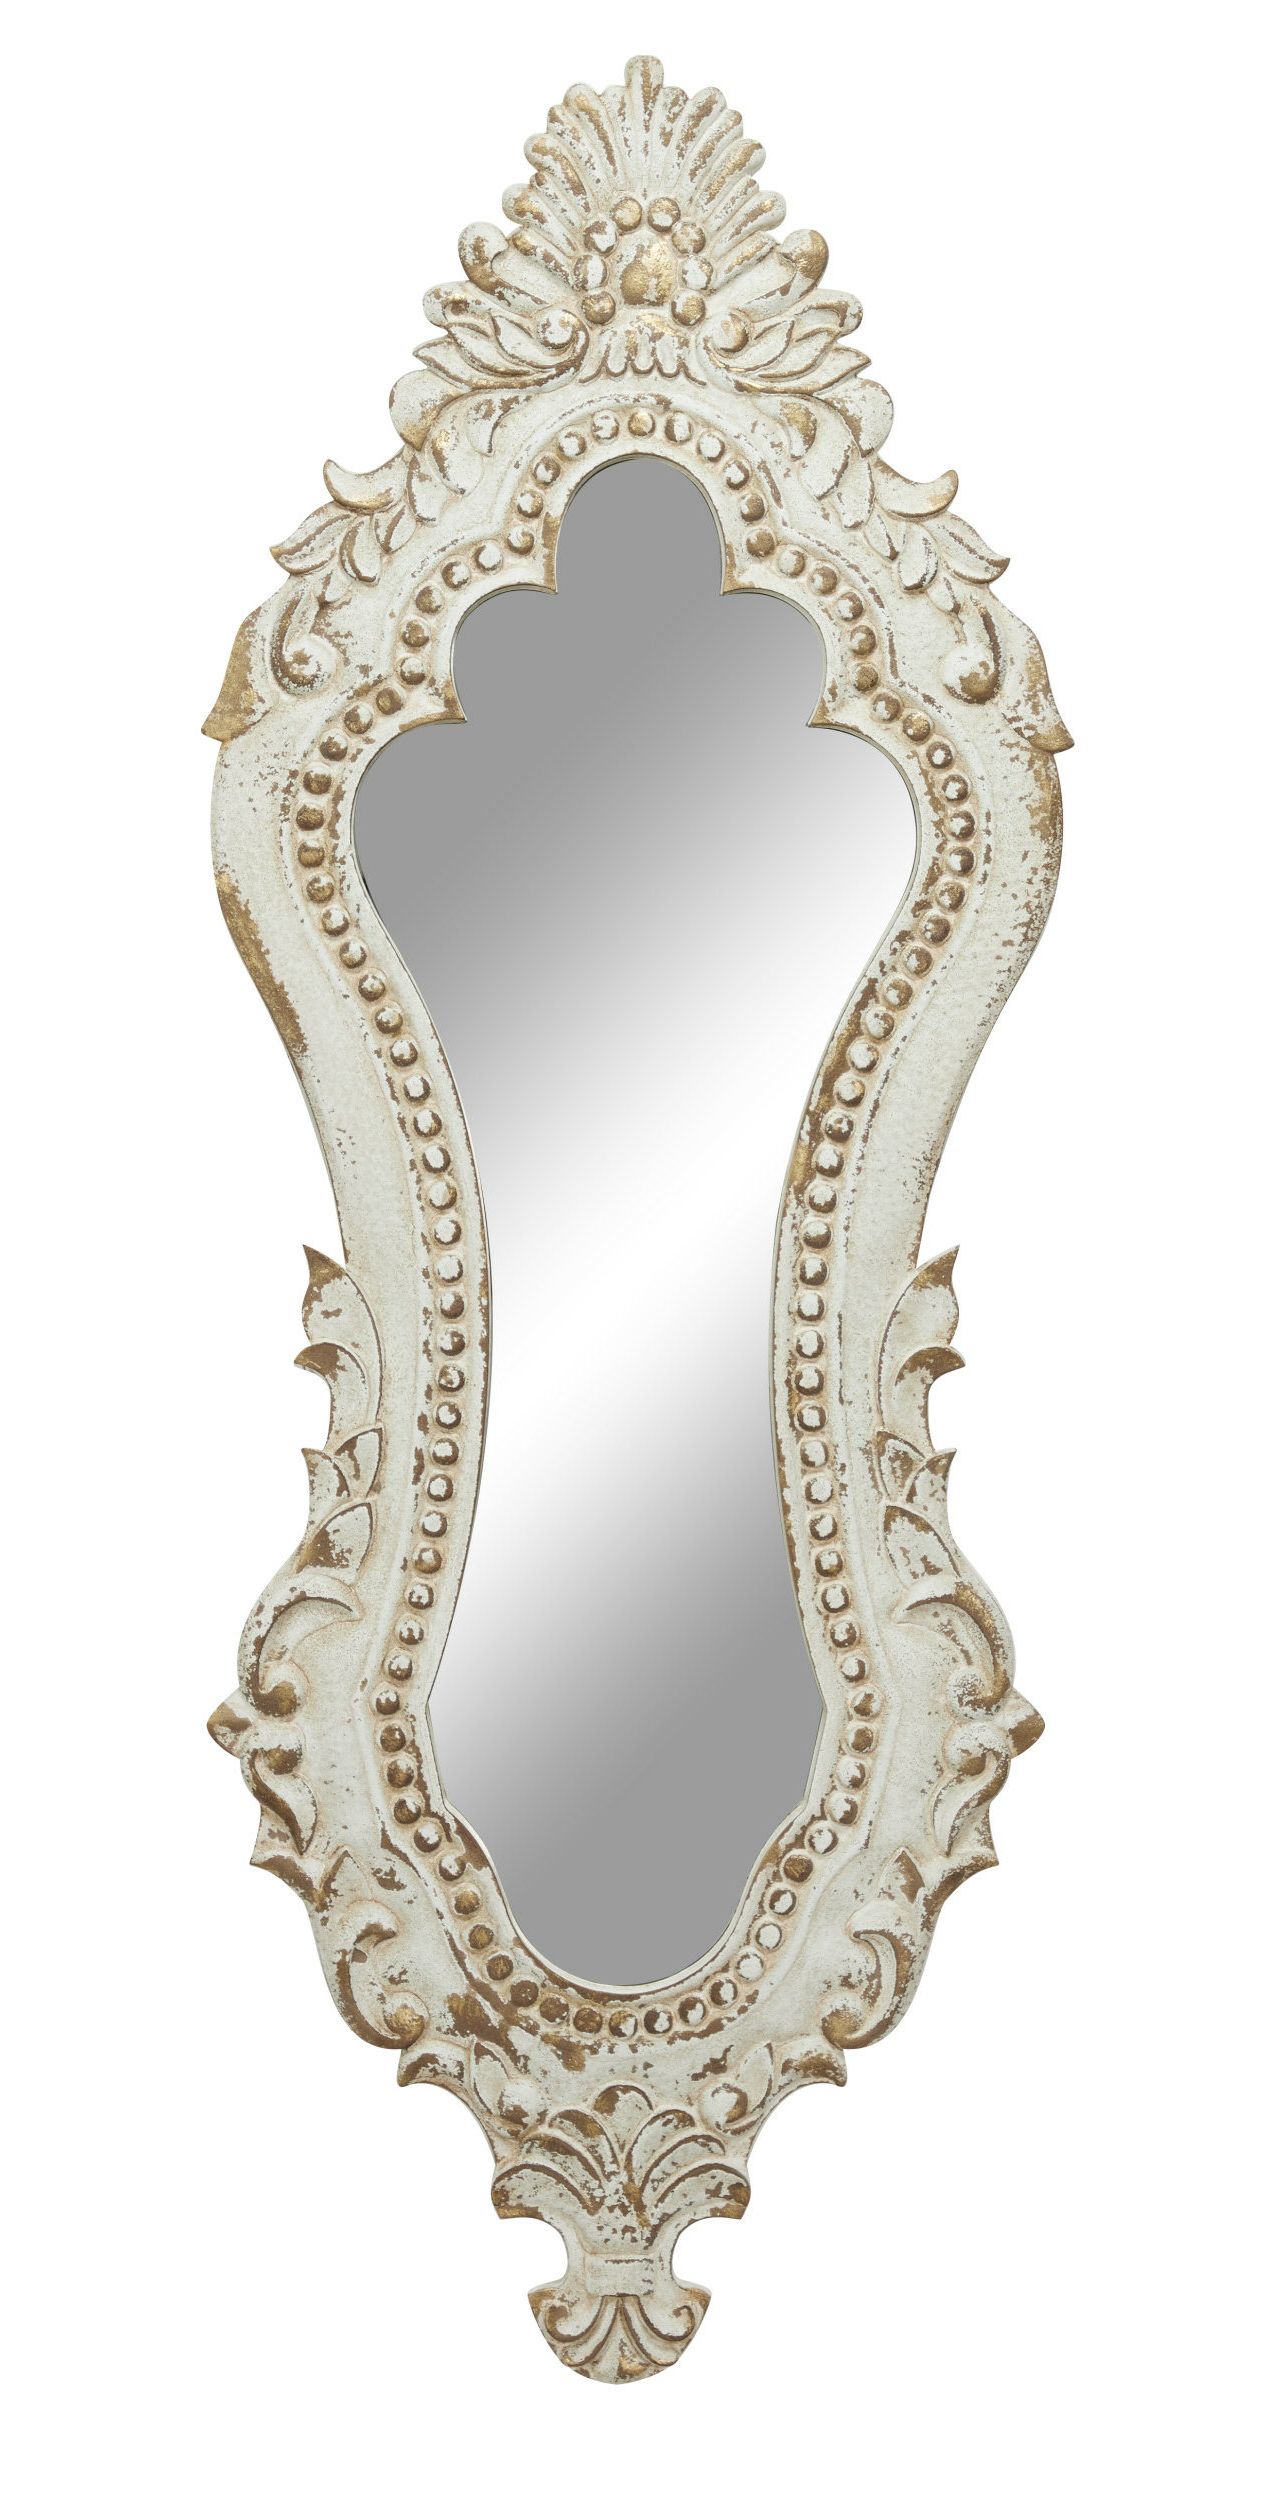 Saylor Wall Mirrors Within Best And Newest Harry Oval Distressed Accent Mirror (View 15 of 20)